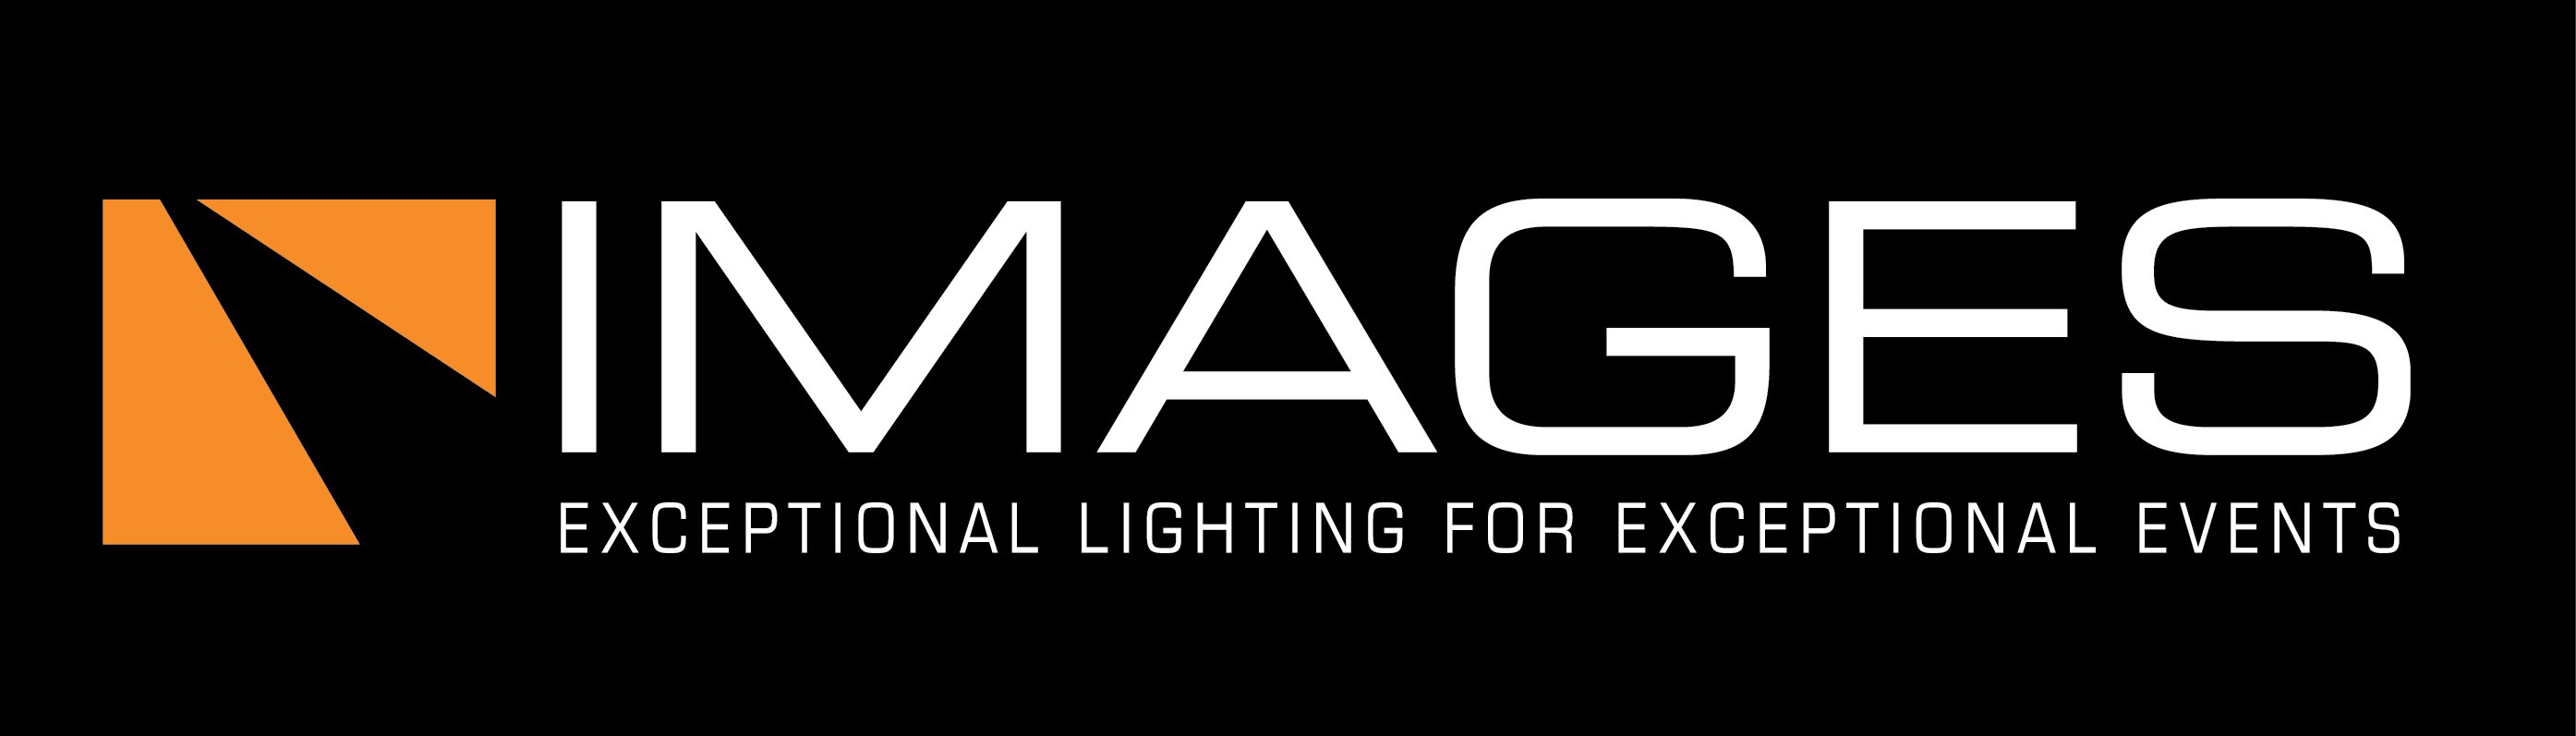 IMAGES BY LIGHTING LOGO